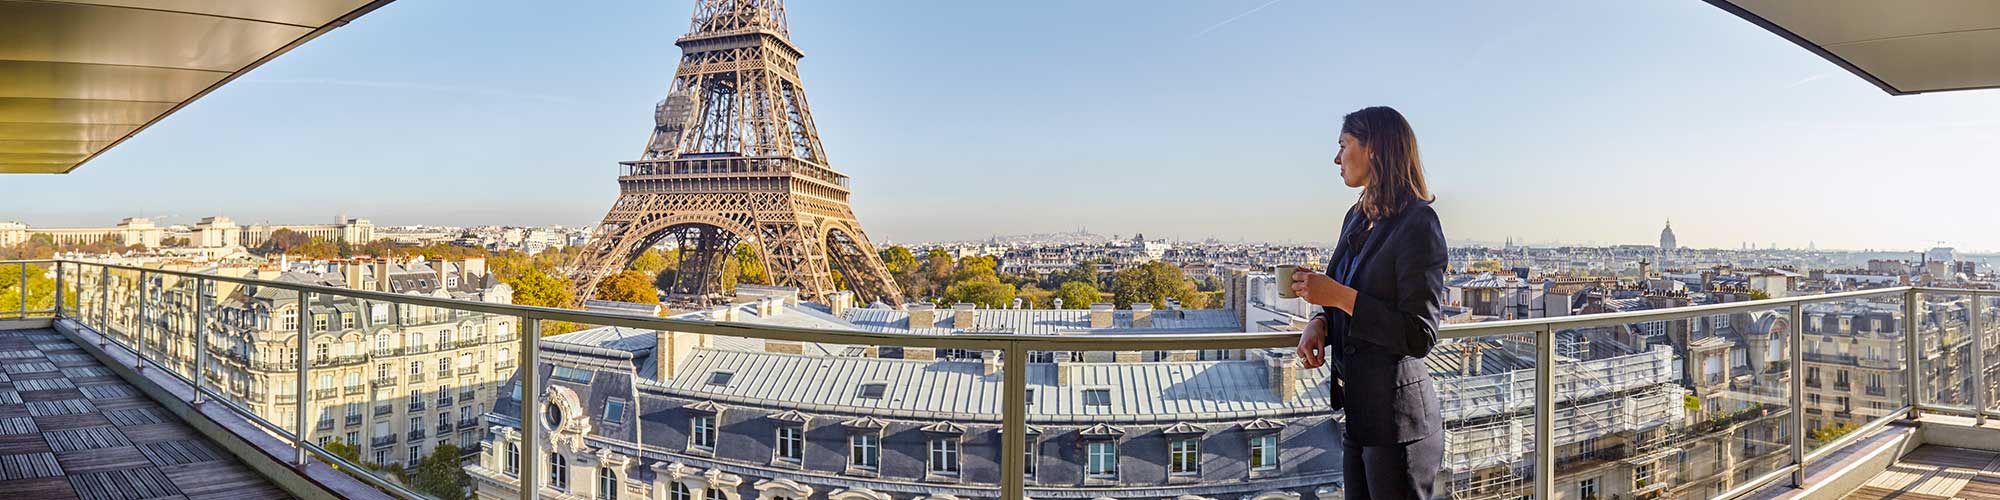 Hotel with Eiffel Tower view